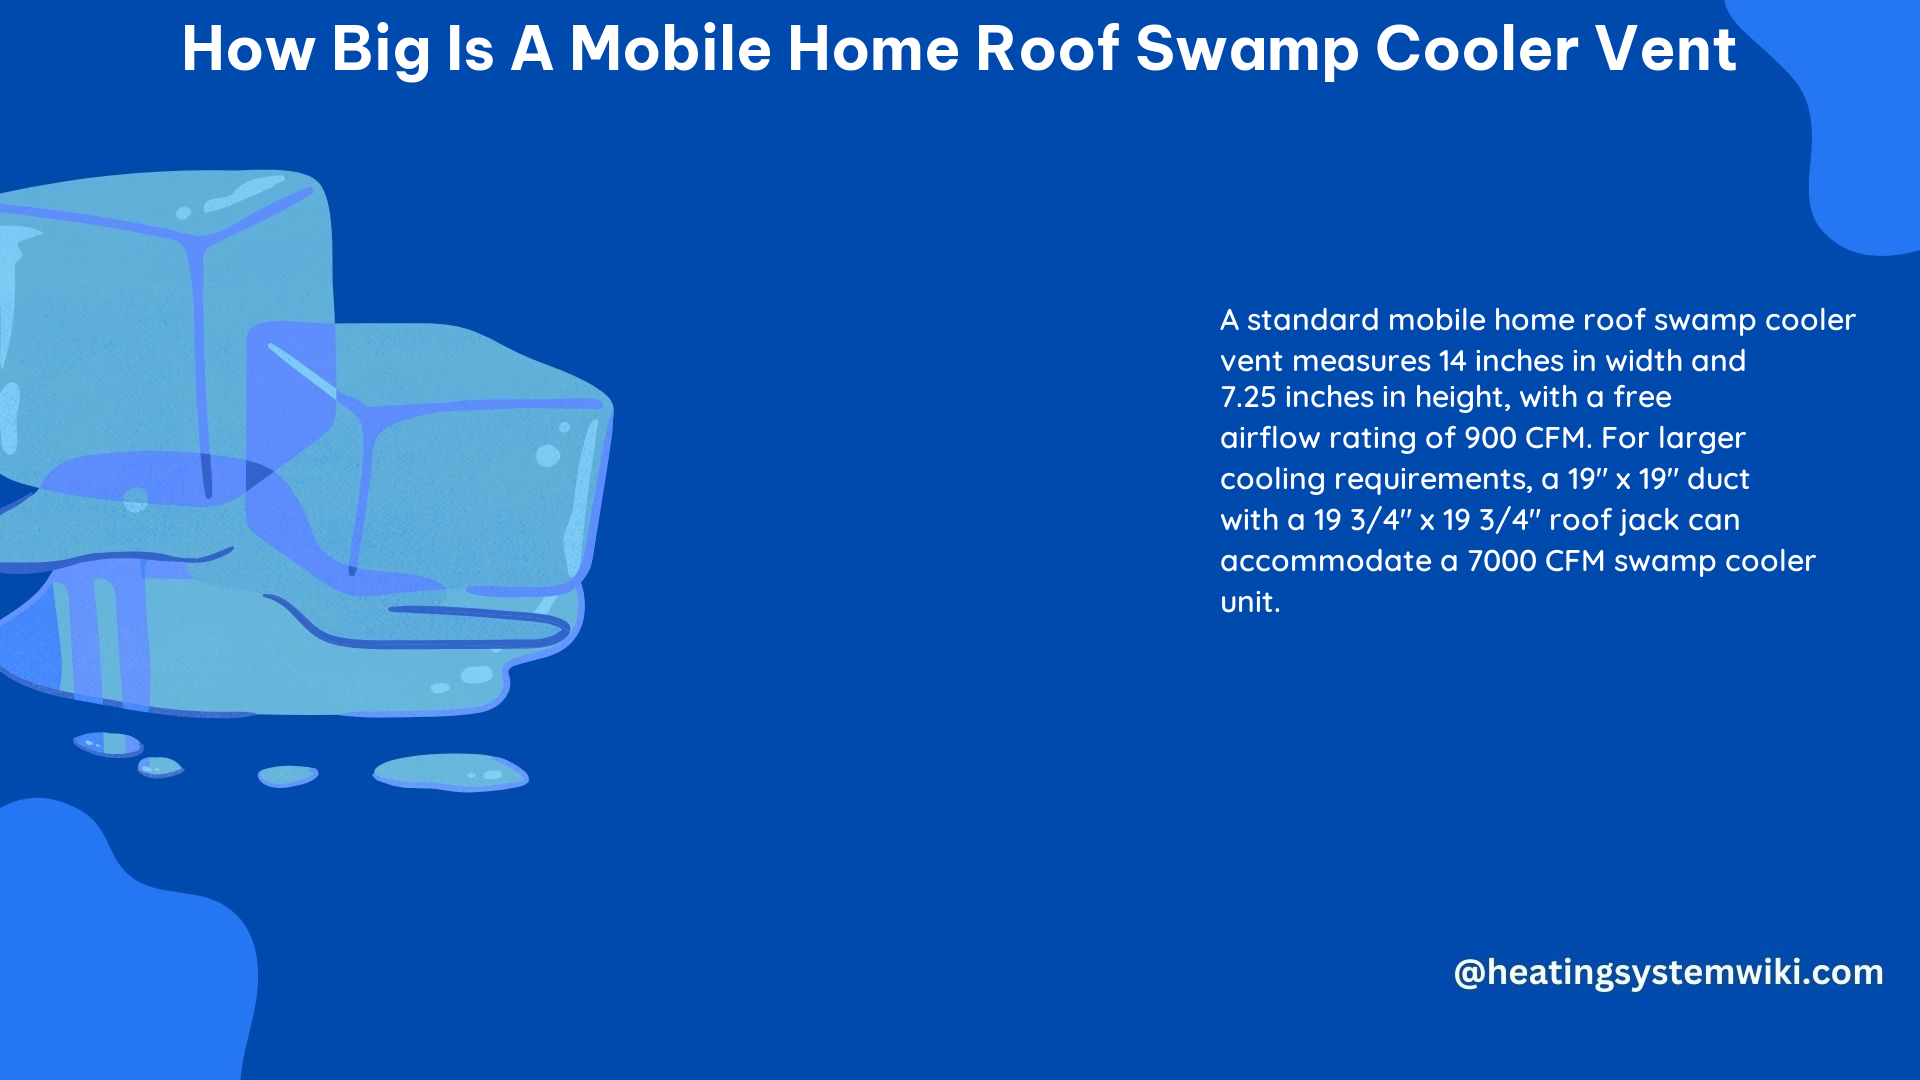 How Big Is a Mobile Home Roof Swamp Cooler Vent